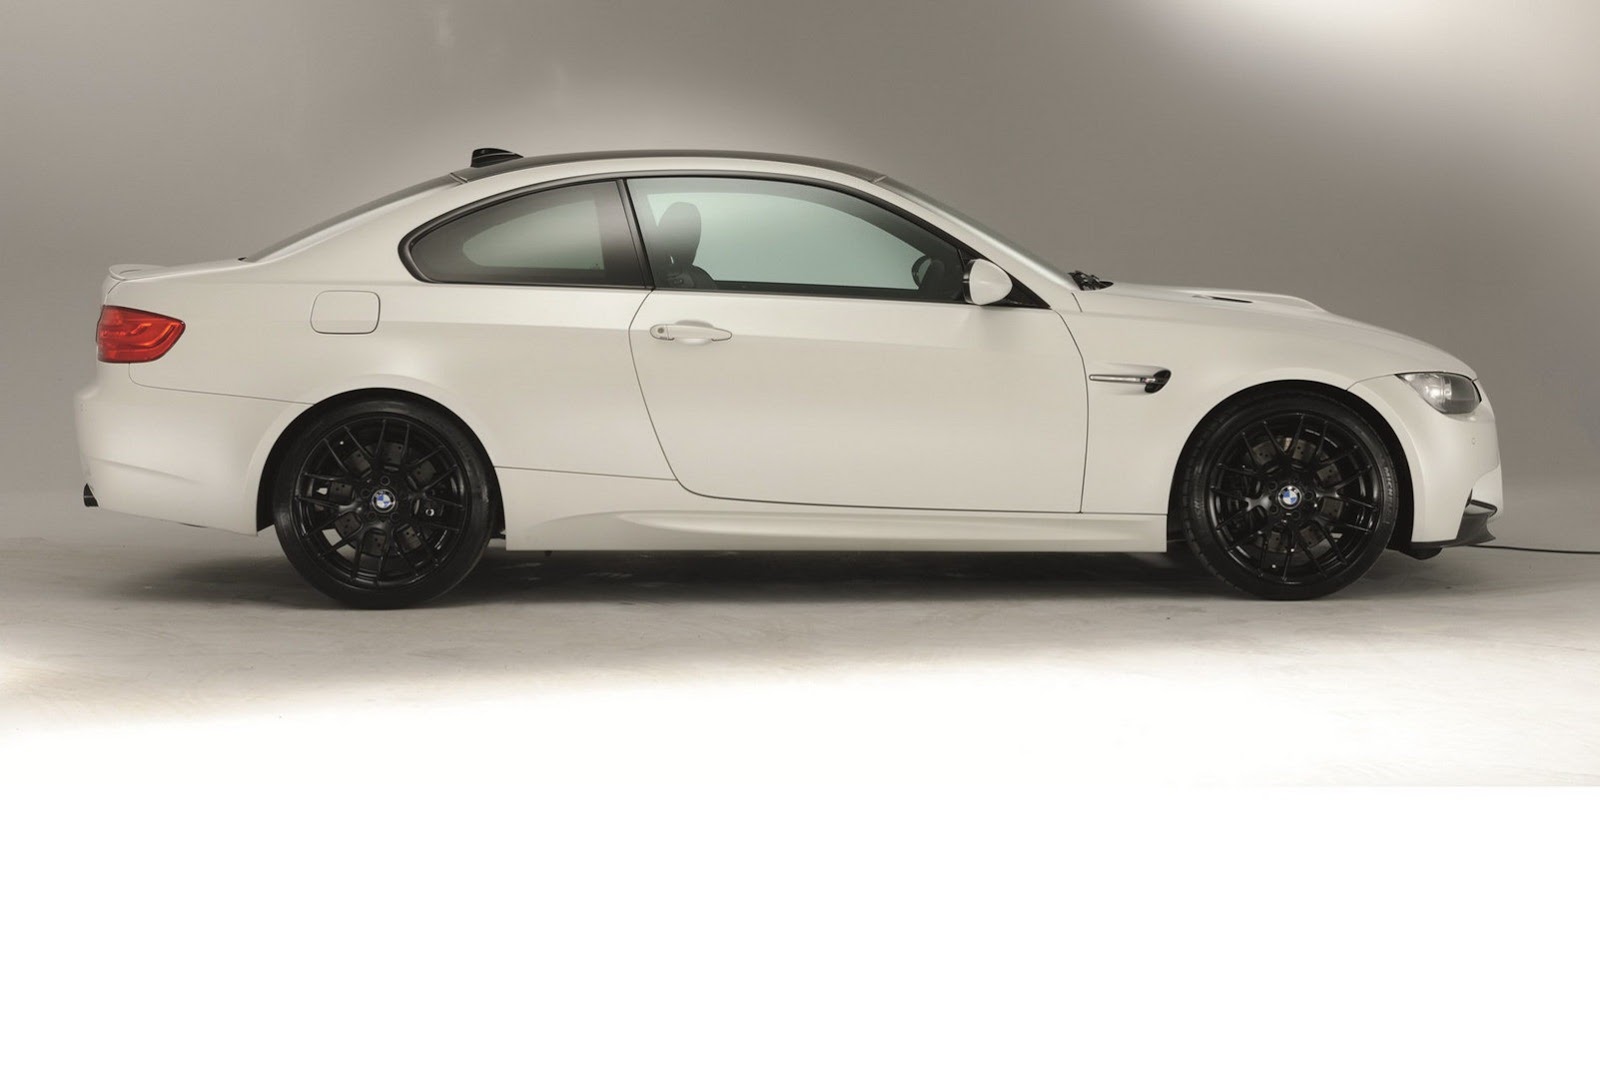 BMW M3 Coupe Frozen Limited Edition